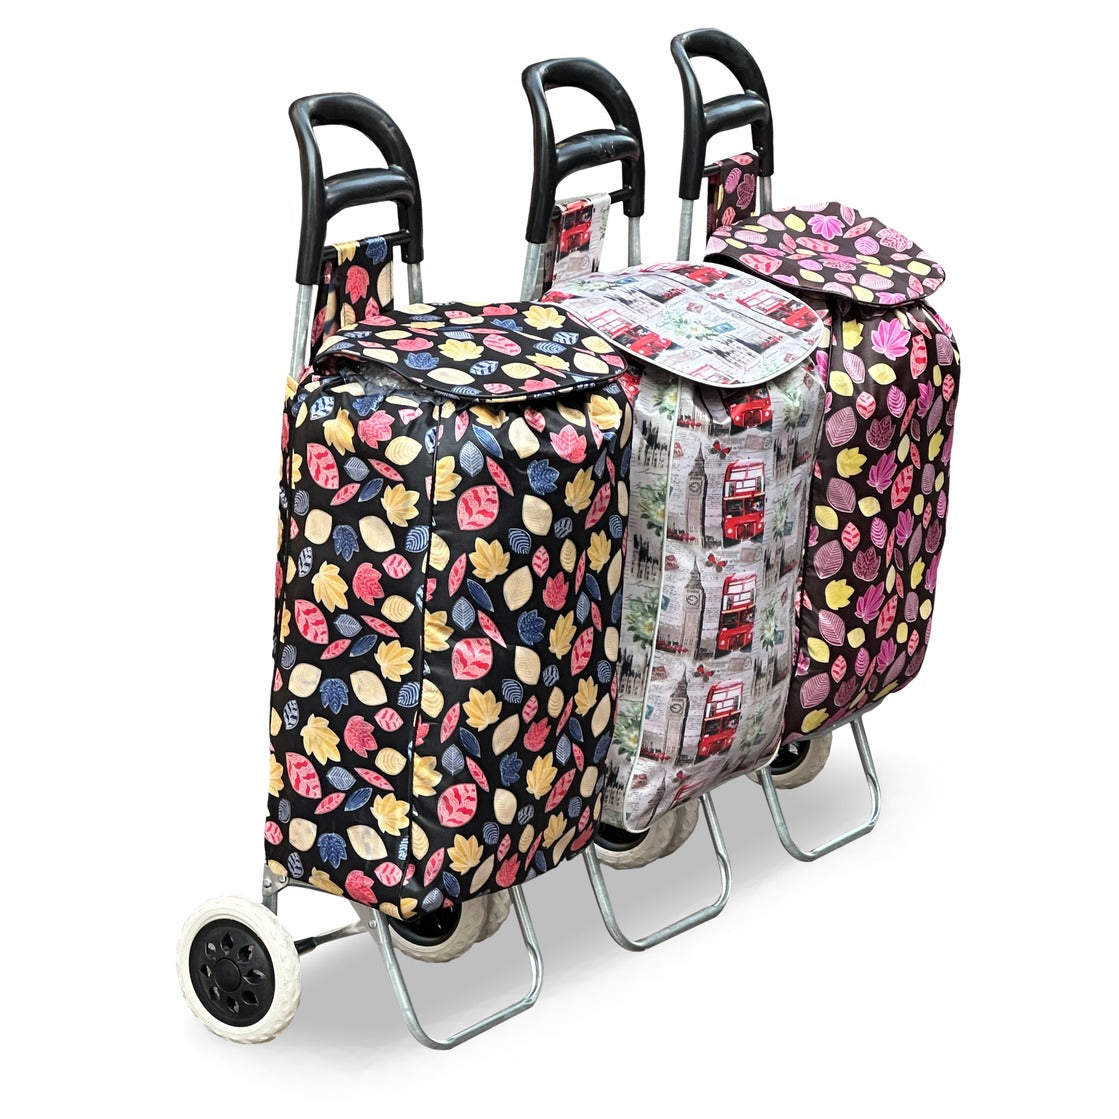 Printed Foldable Grocery Shopping Trolley Bag with Two Wheels | Portable Rolling Shopping Cart